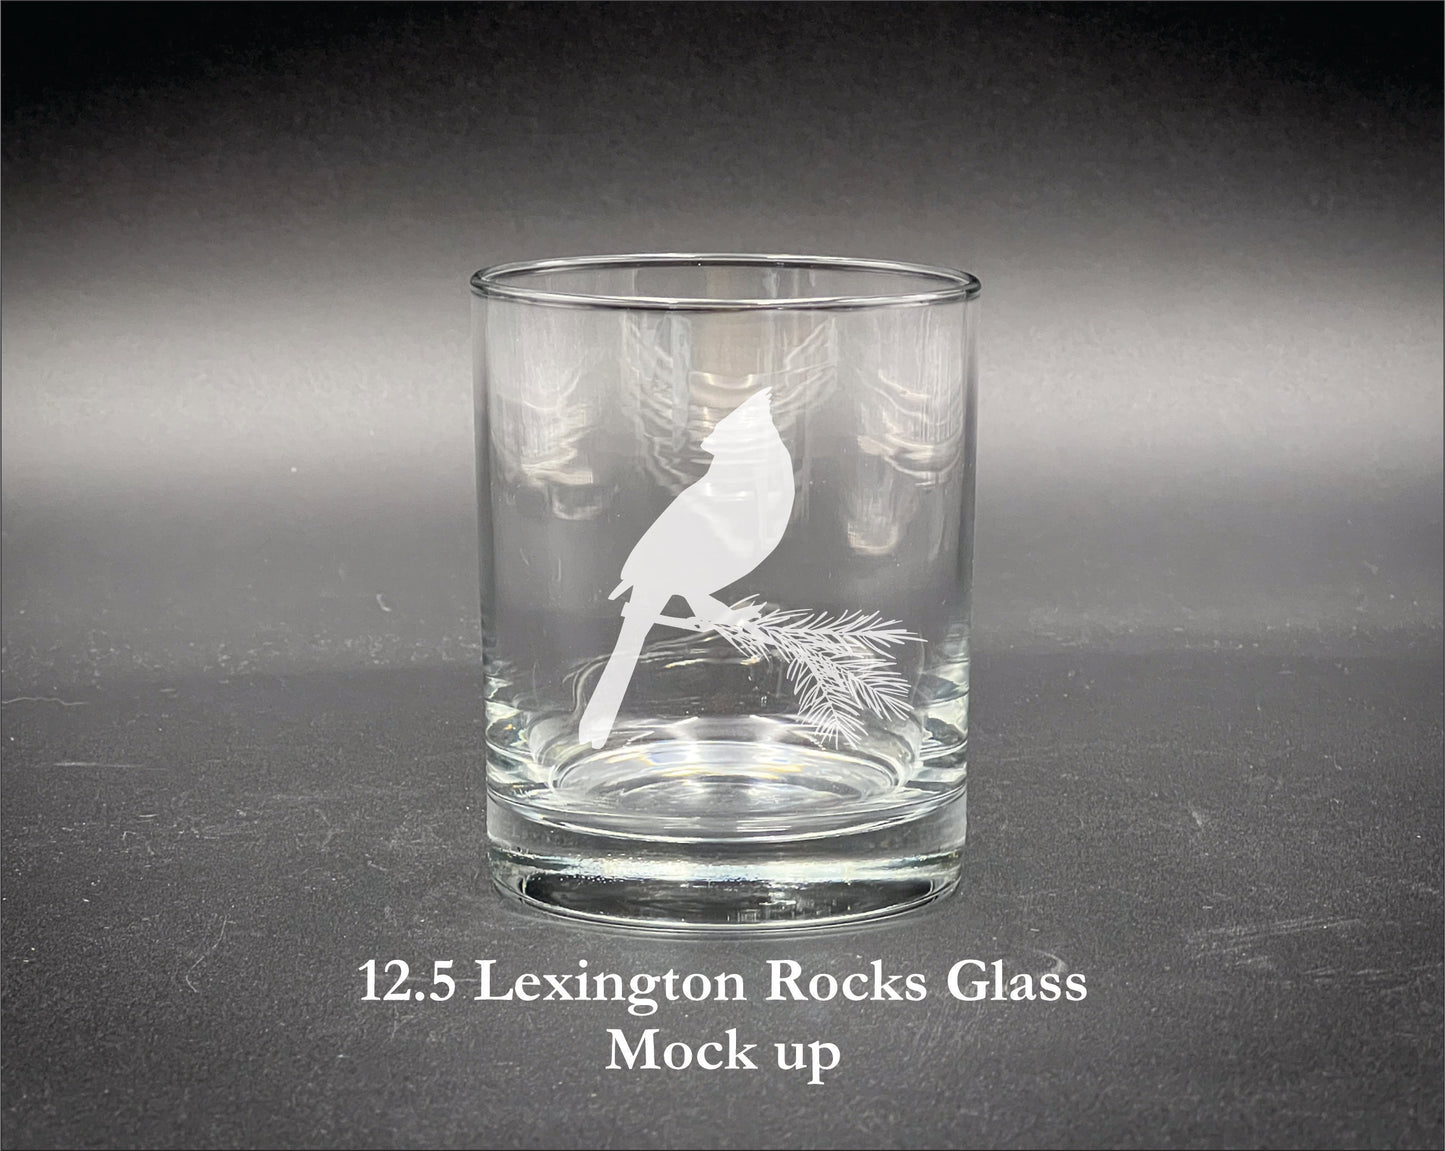 Cardinal on a Branch Laser Engraved Glassware